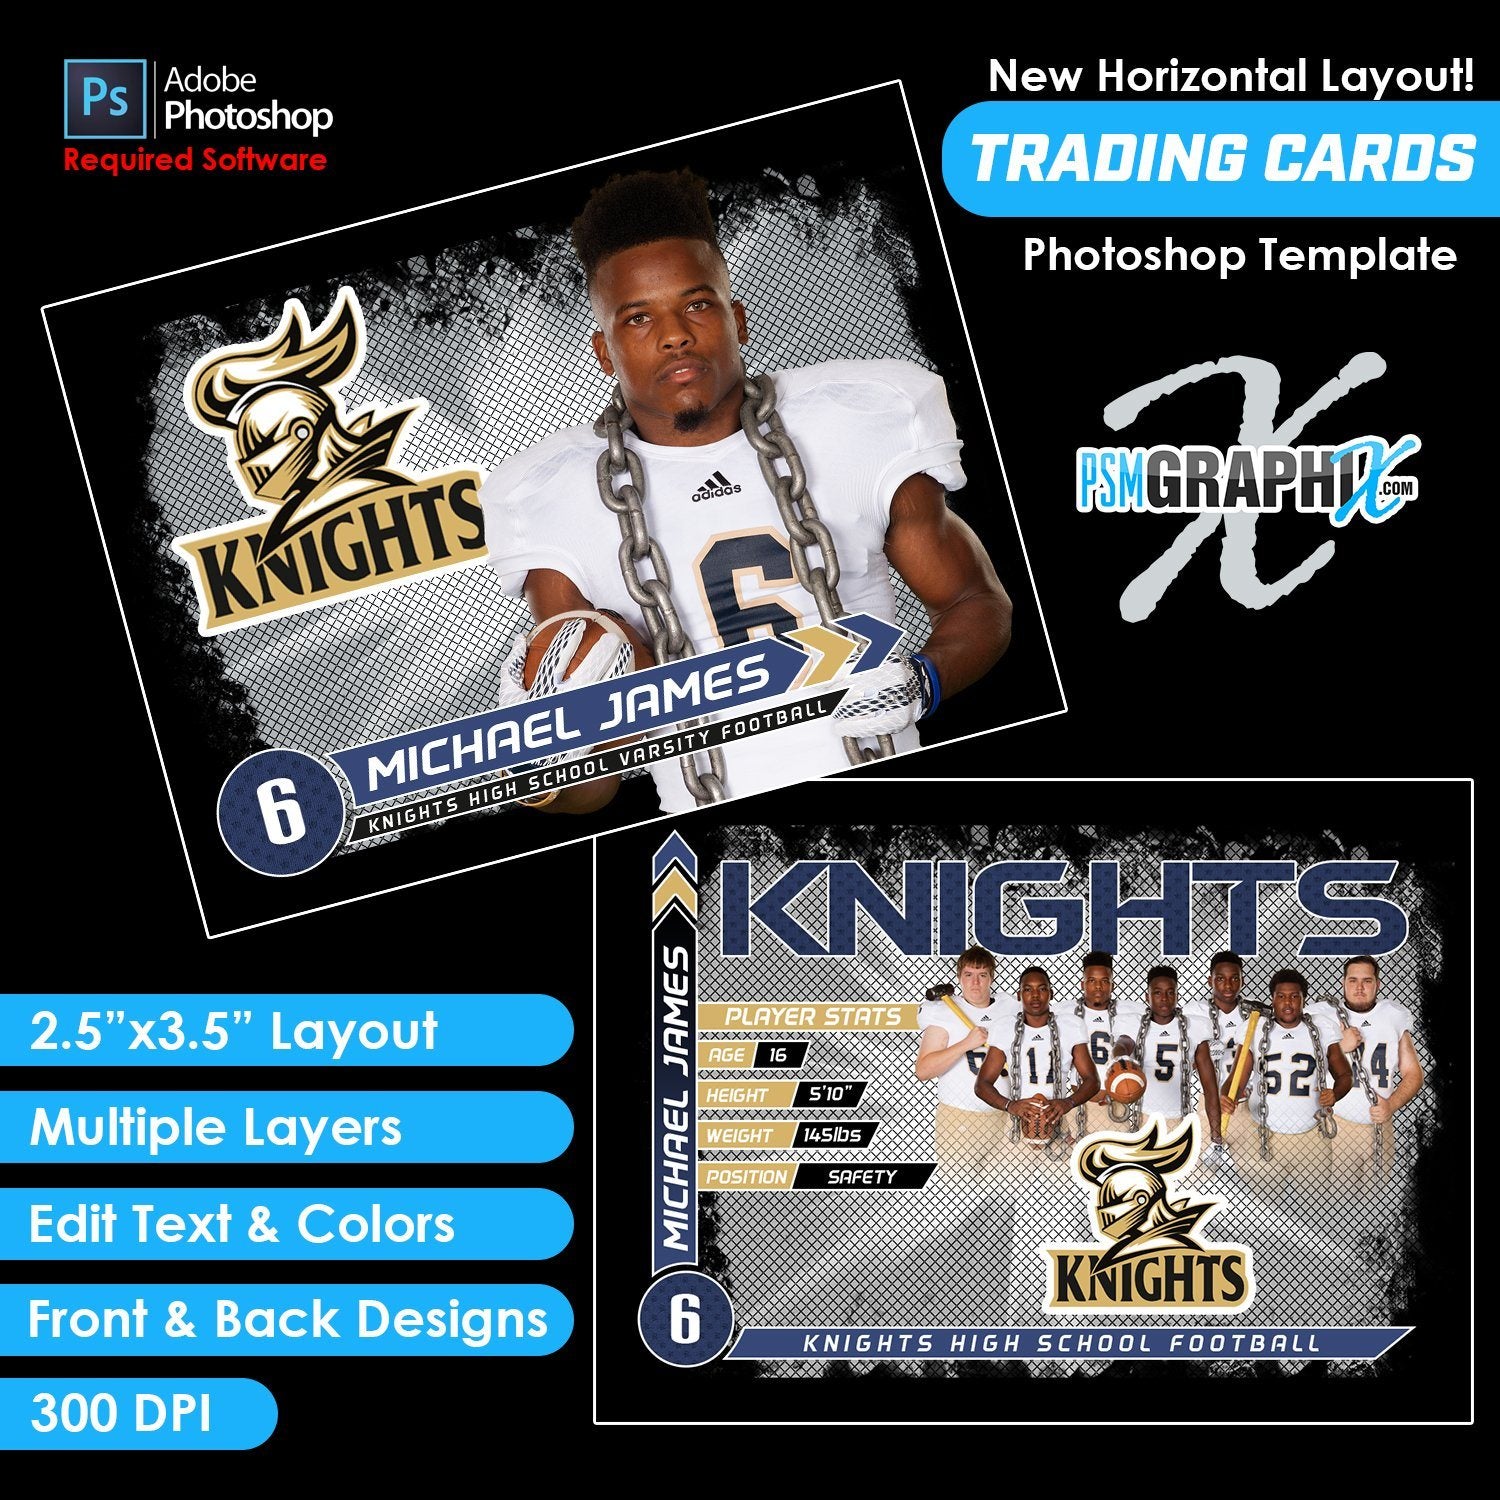 Grill - V4 - Game Day Trading Card Template-Photoshop Template - PSMGraphix